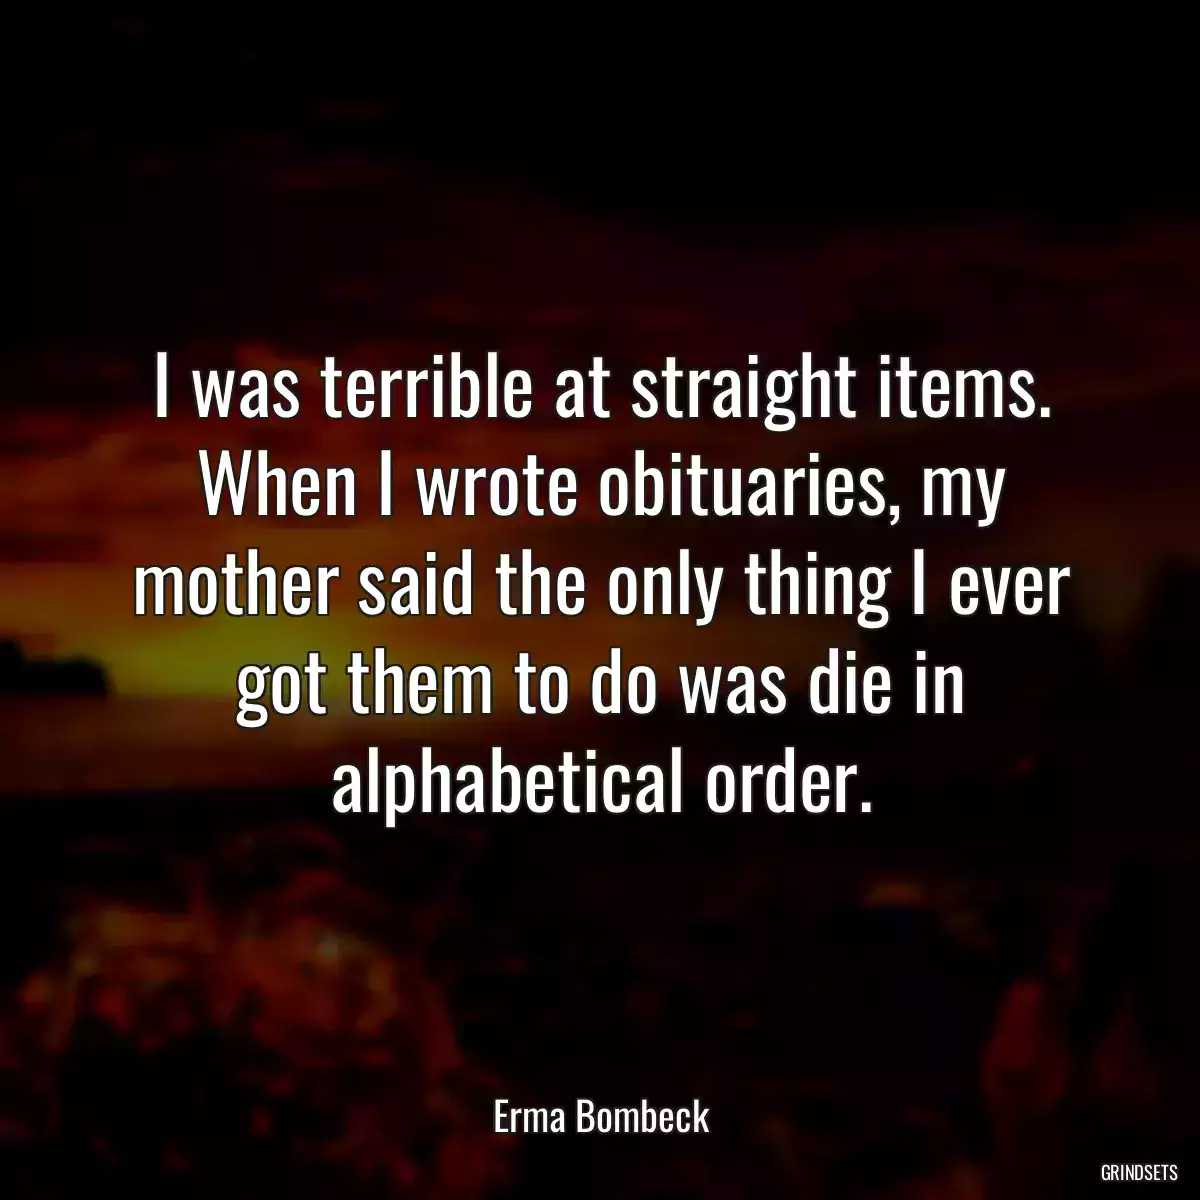 I was terrible at straight items. When I wrote obituaries, my mother said the only thing I ever got them to do was die in alphabetical order.